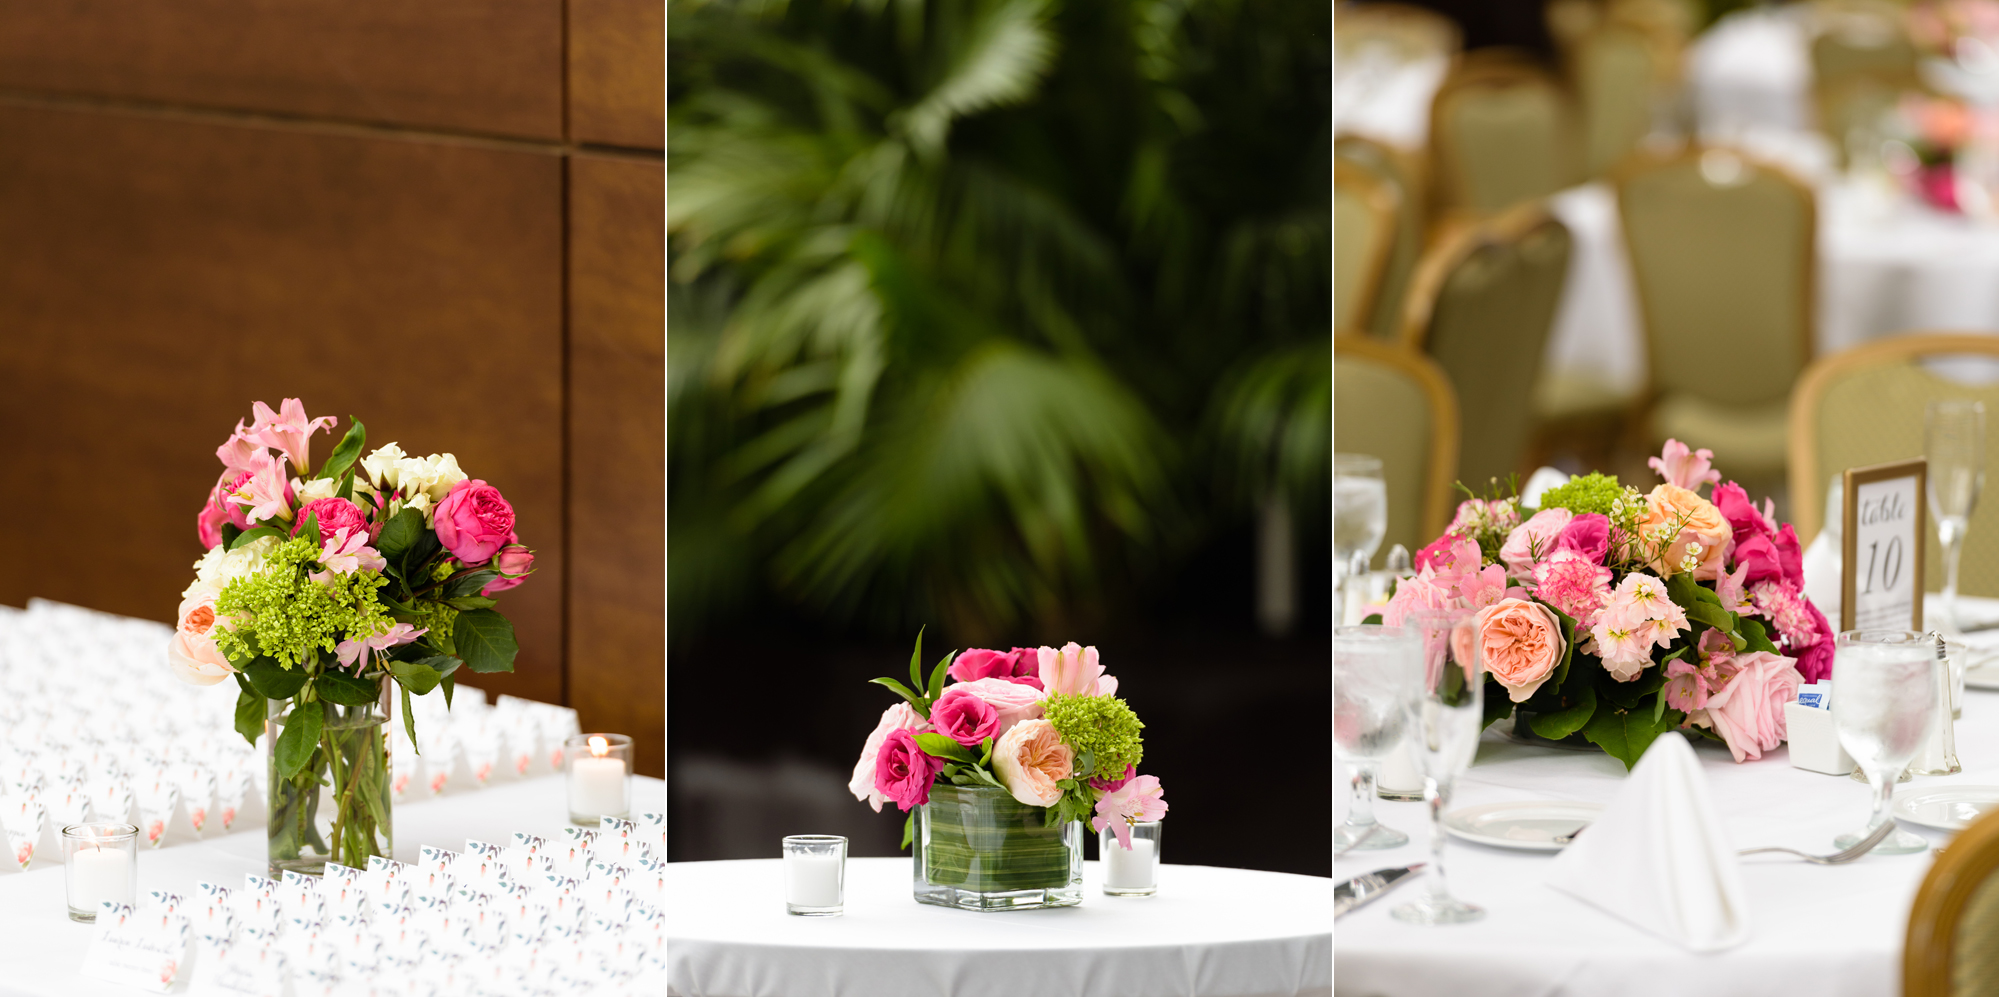 Wedding Reception details at the DoubleTree by Hilton